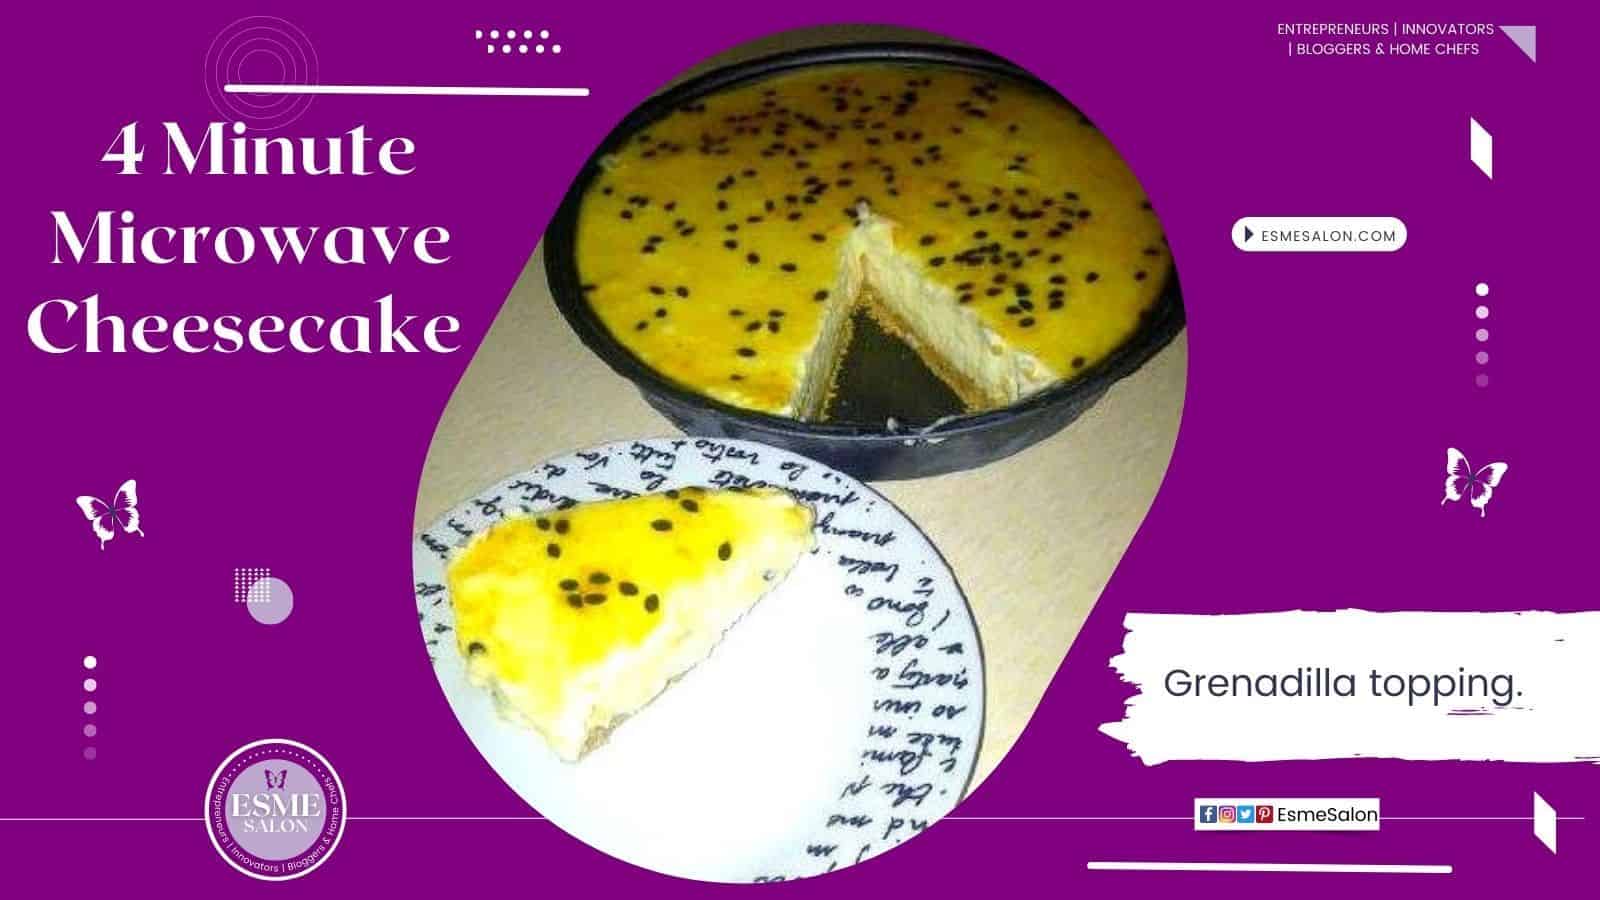 An Easy recipe with awesome results, you should try this 4 Minute Microwave Cheesecake with granadilla topping.